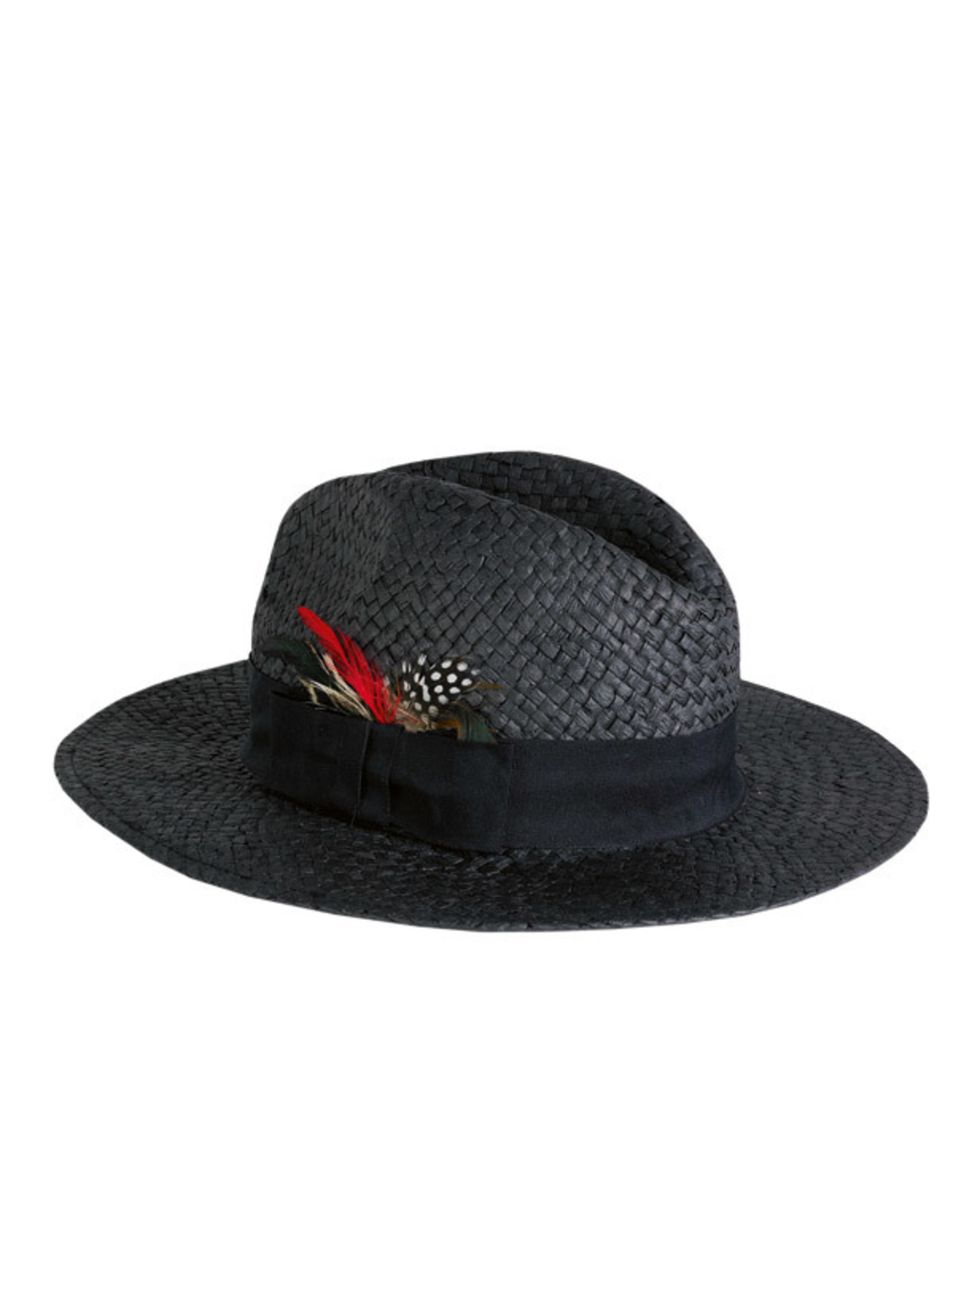 <p><a href="http://www.urbanoutfitters.co.uk/accessories/hats/icat/whats/&amp;bklist=icat,5,shop,womens,womensaccessories,whats">Urban Outfitters</a> black straw fedora, £22</p>